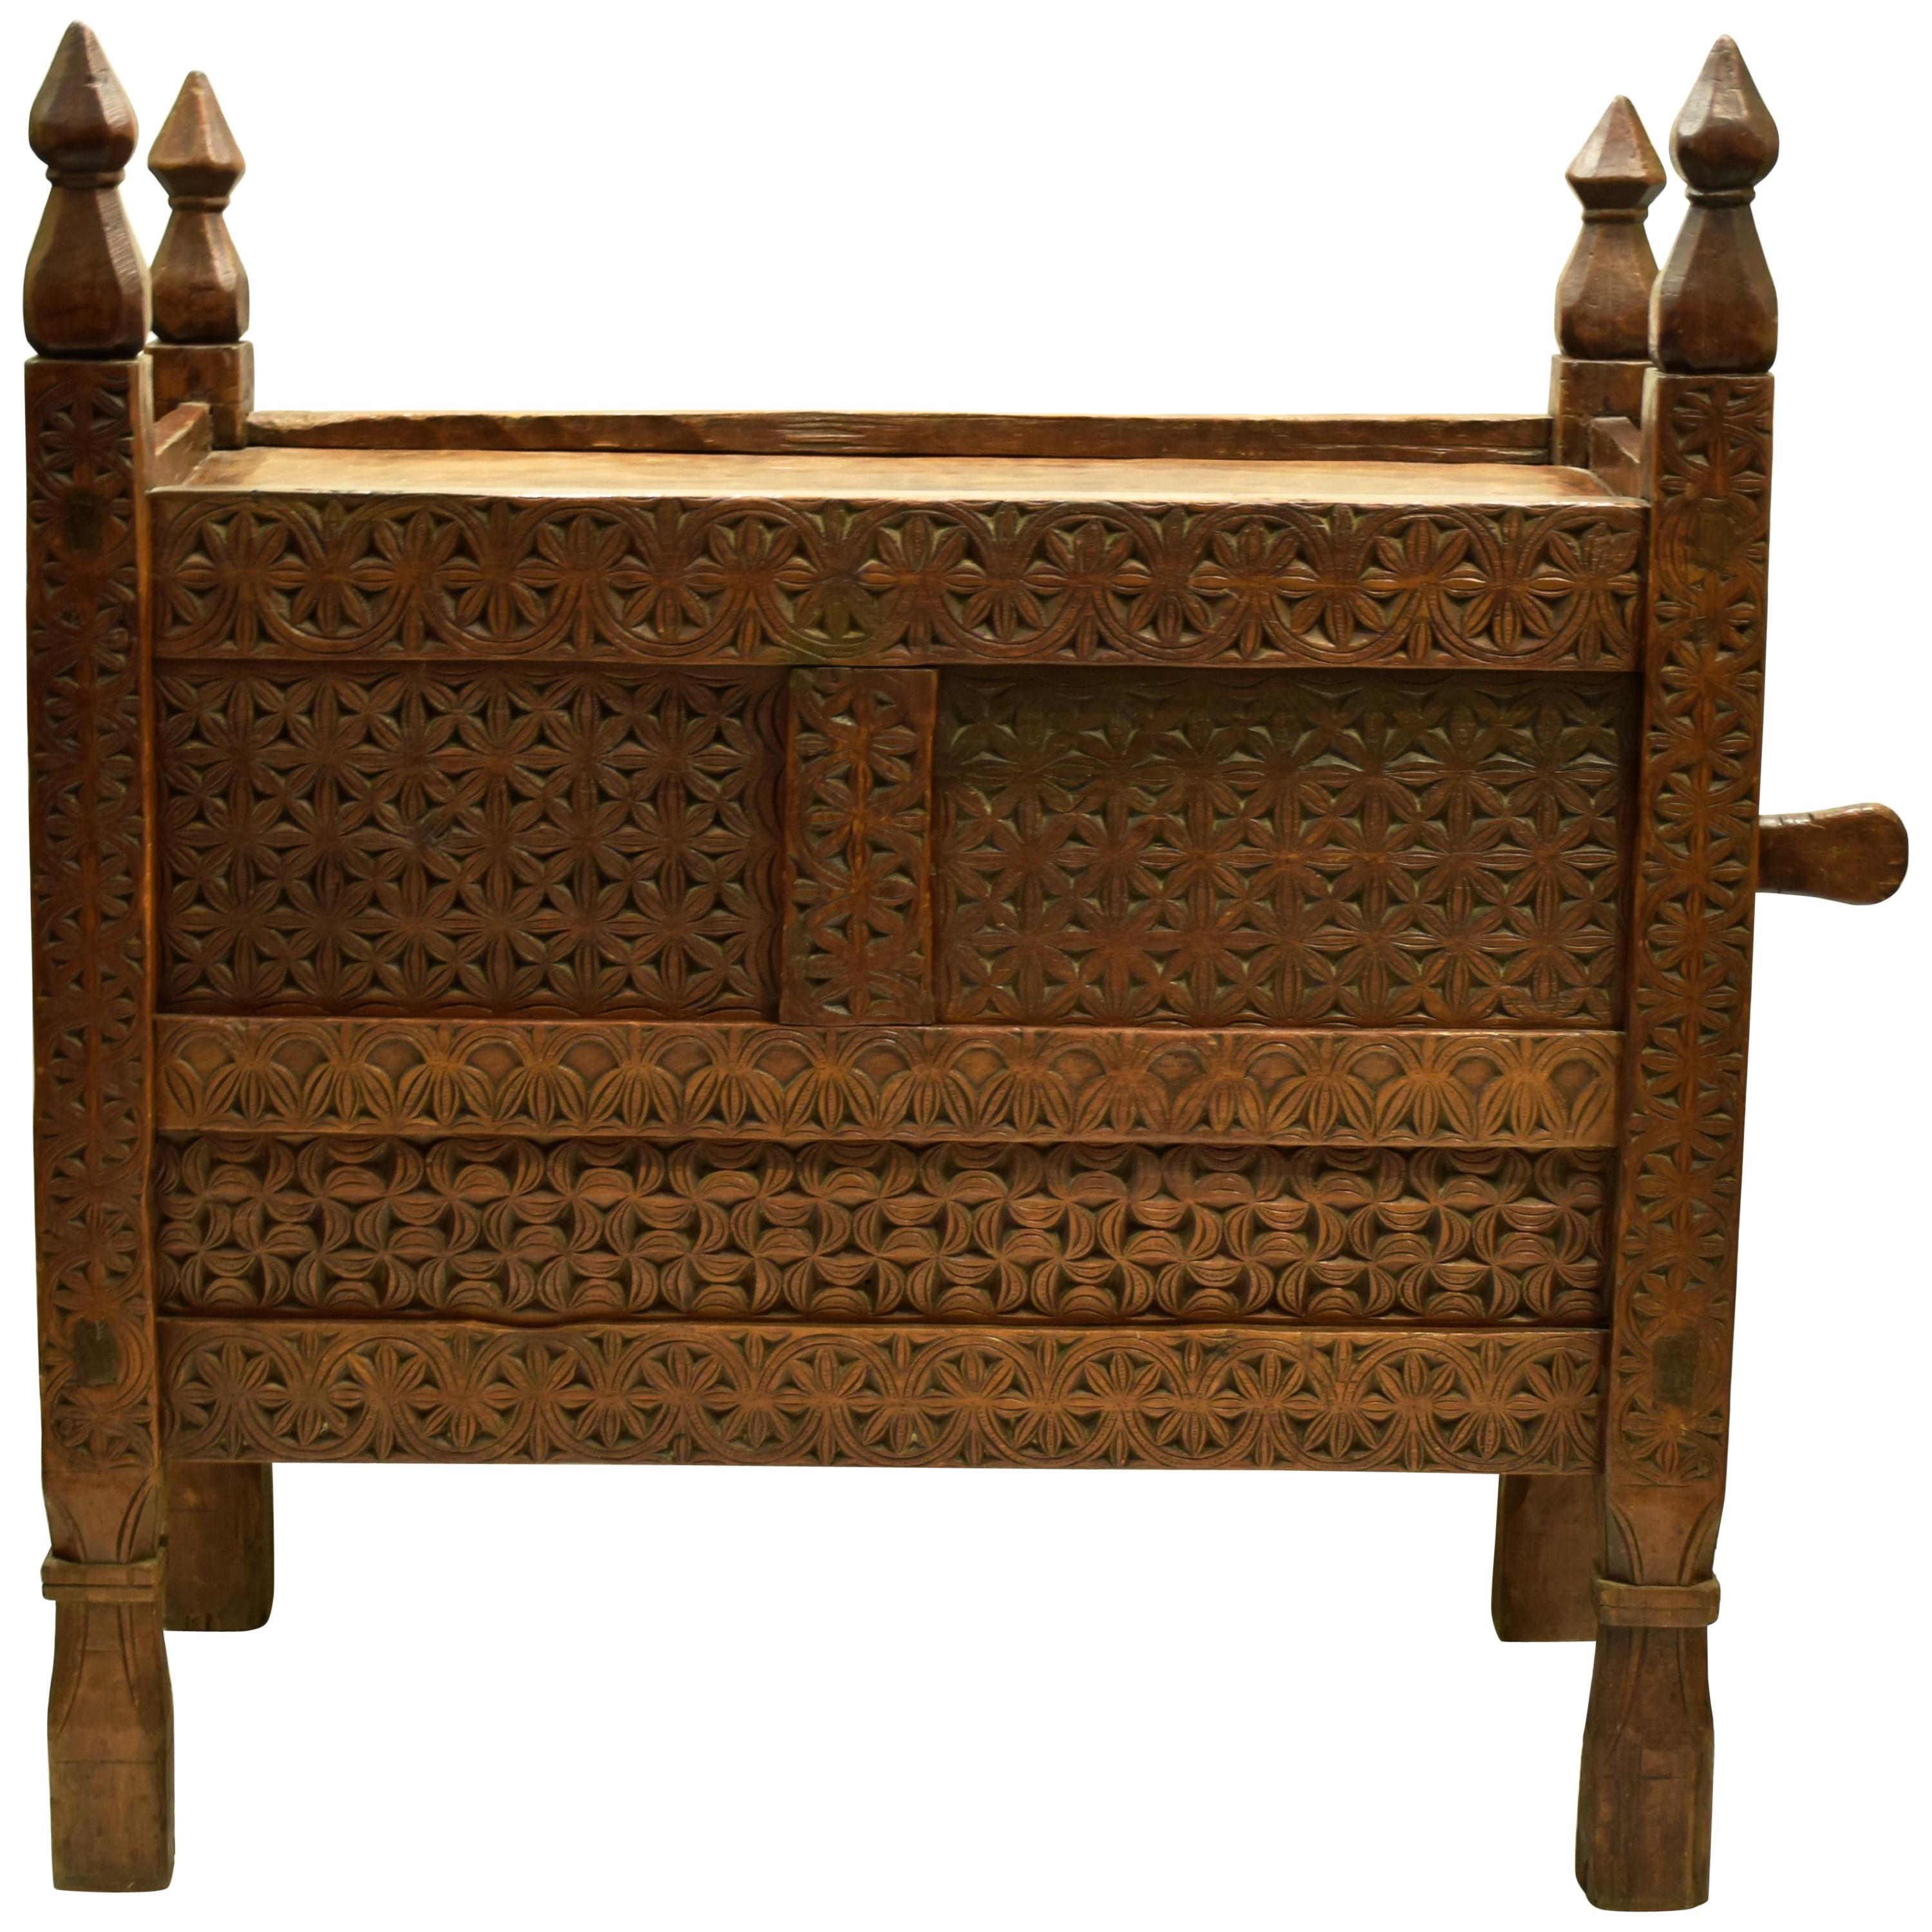 Antique Hand-Carved Swat Chest from Pakistan